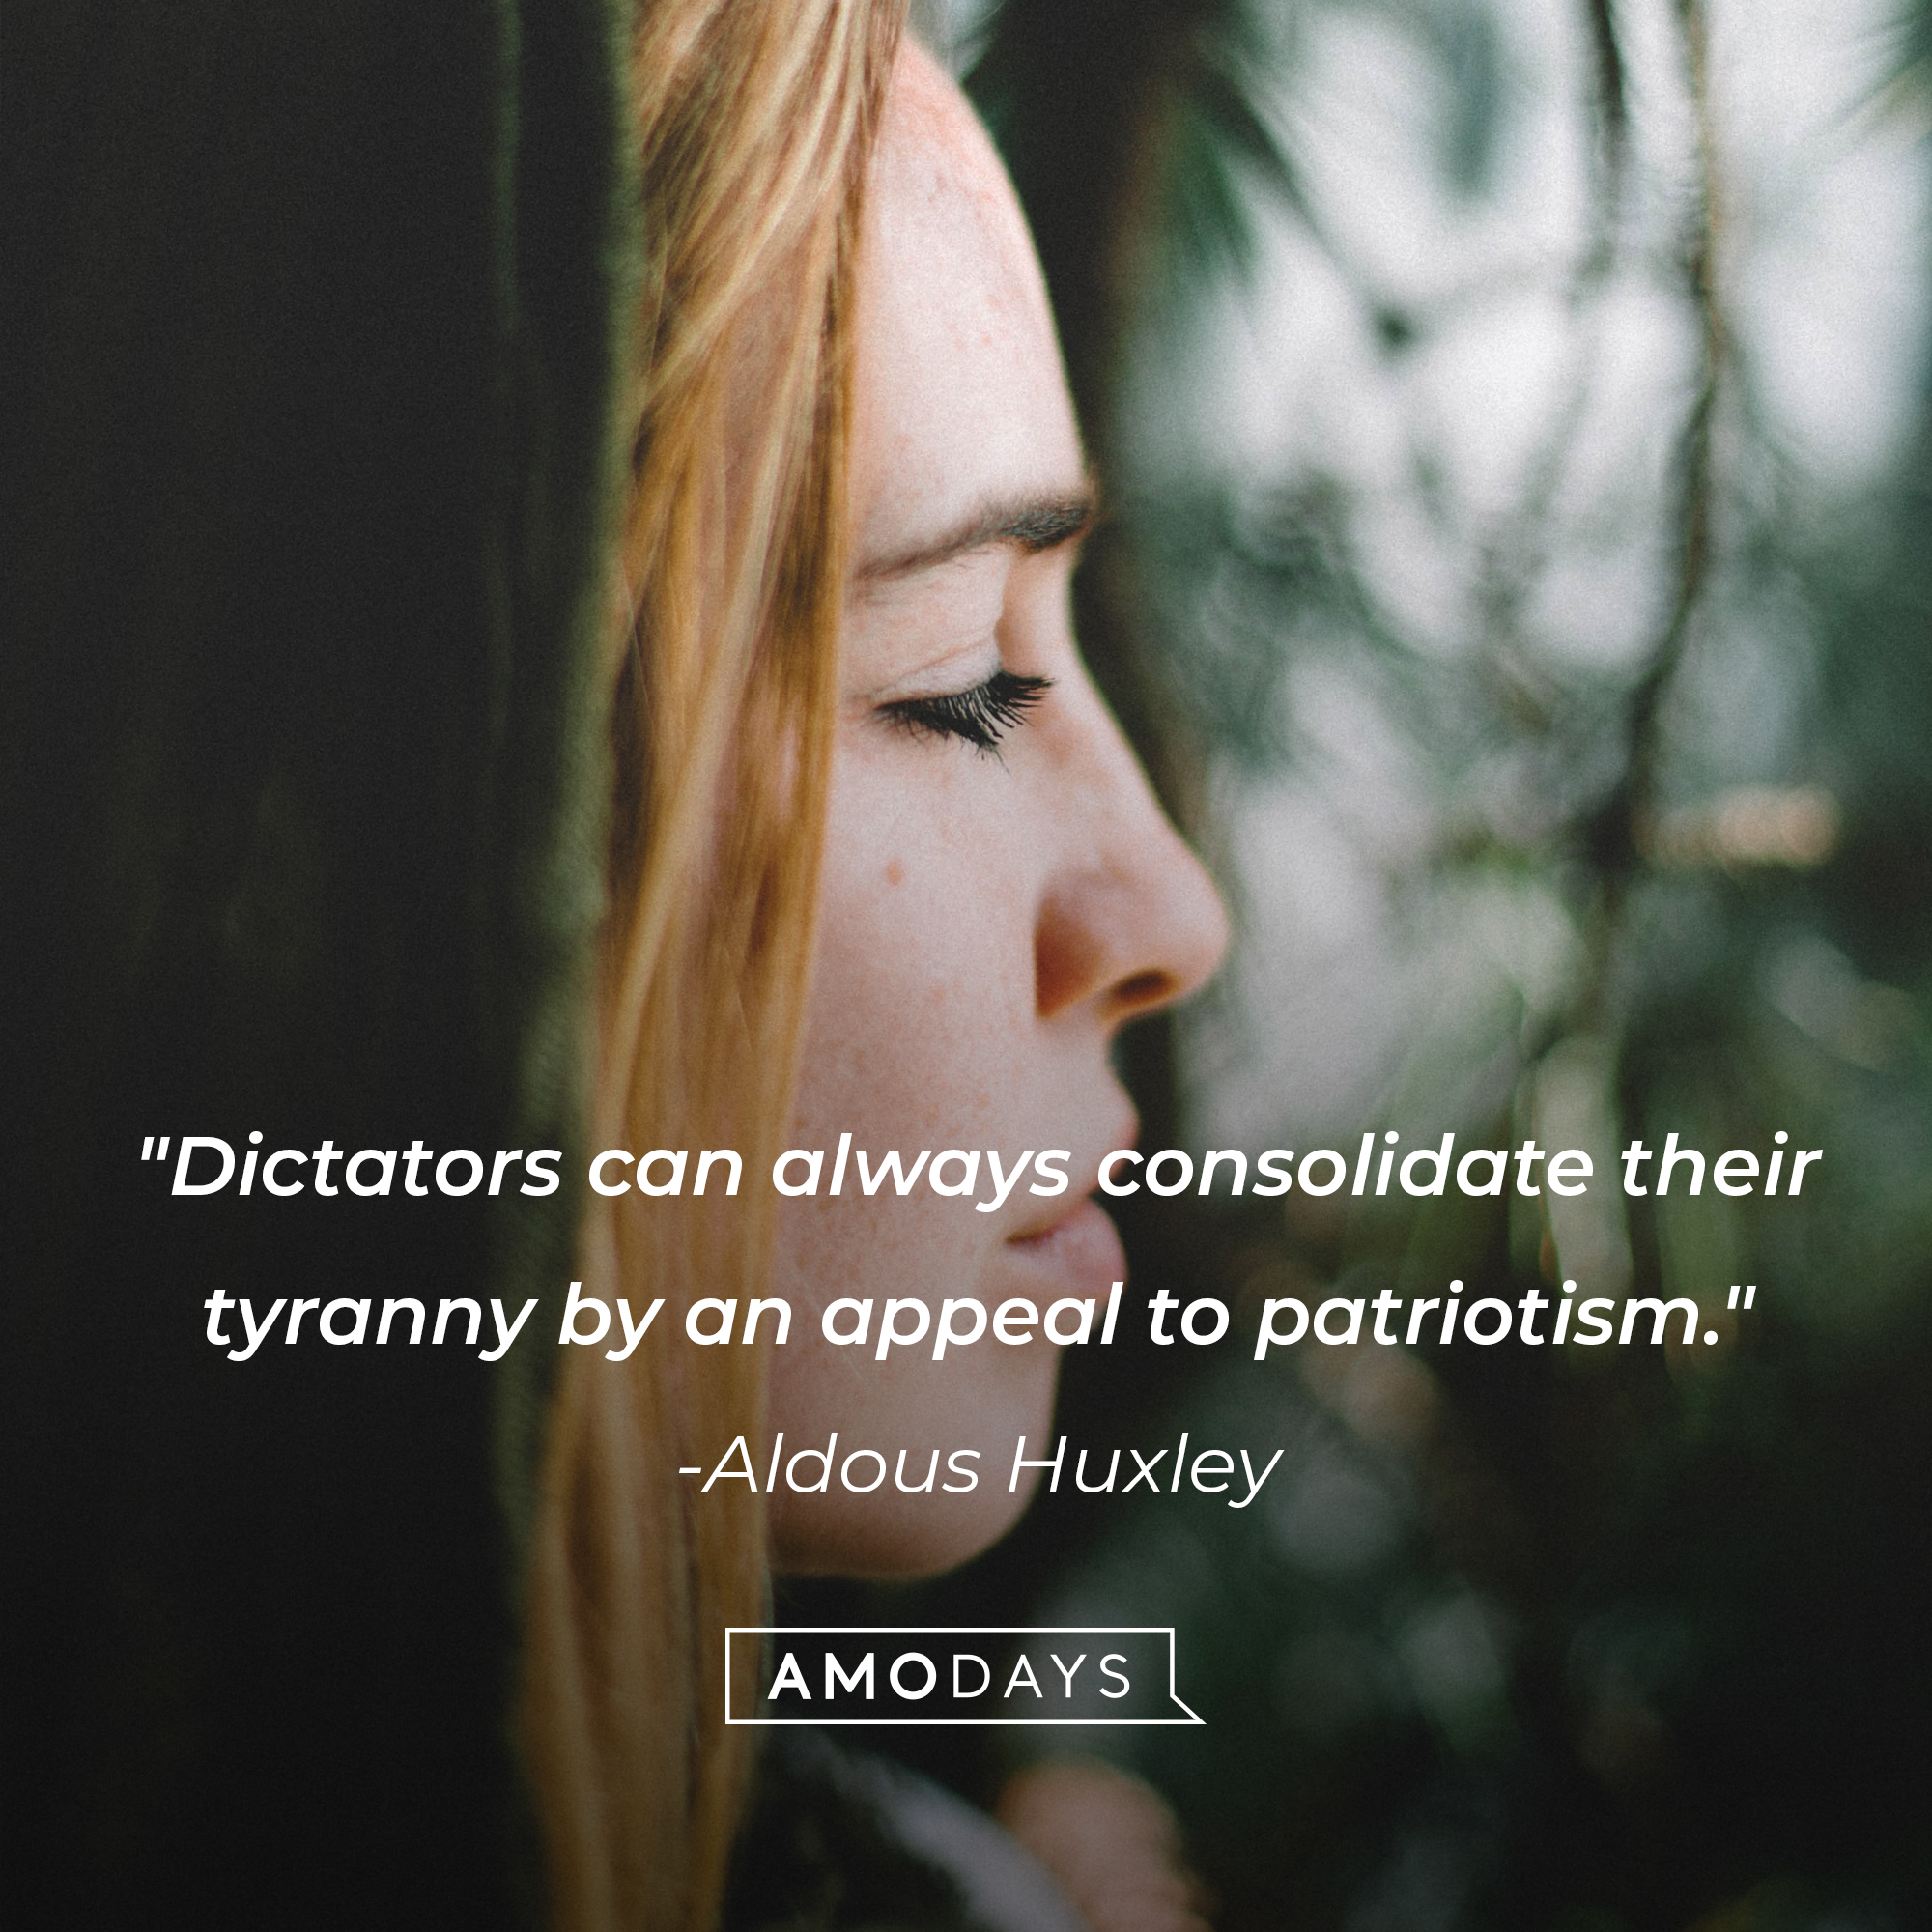 Aldous Huxley's quote: "Dictators can always consolidate their tyranny by an appeal to patriotism." | Image: AmoDays